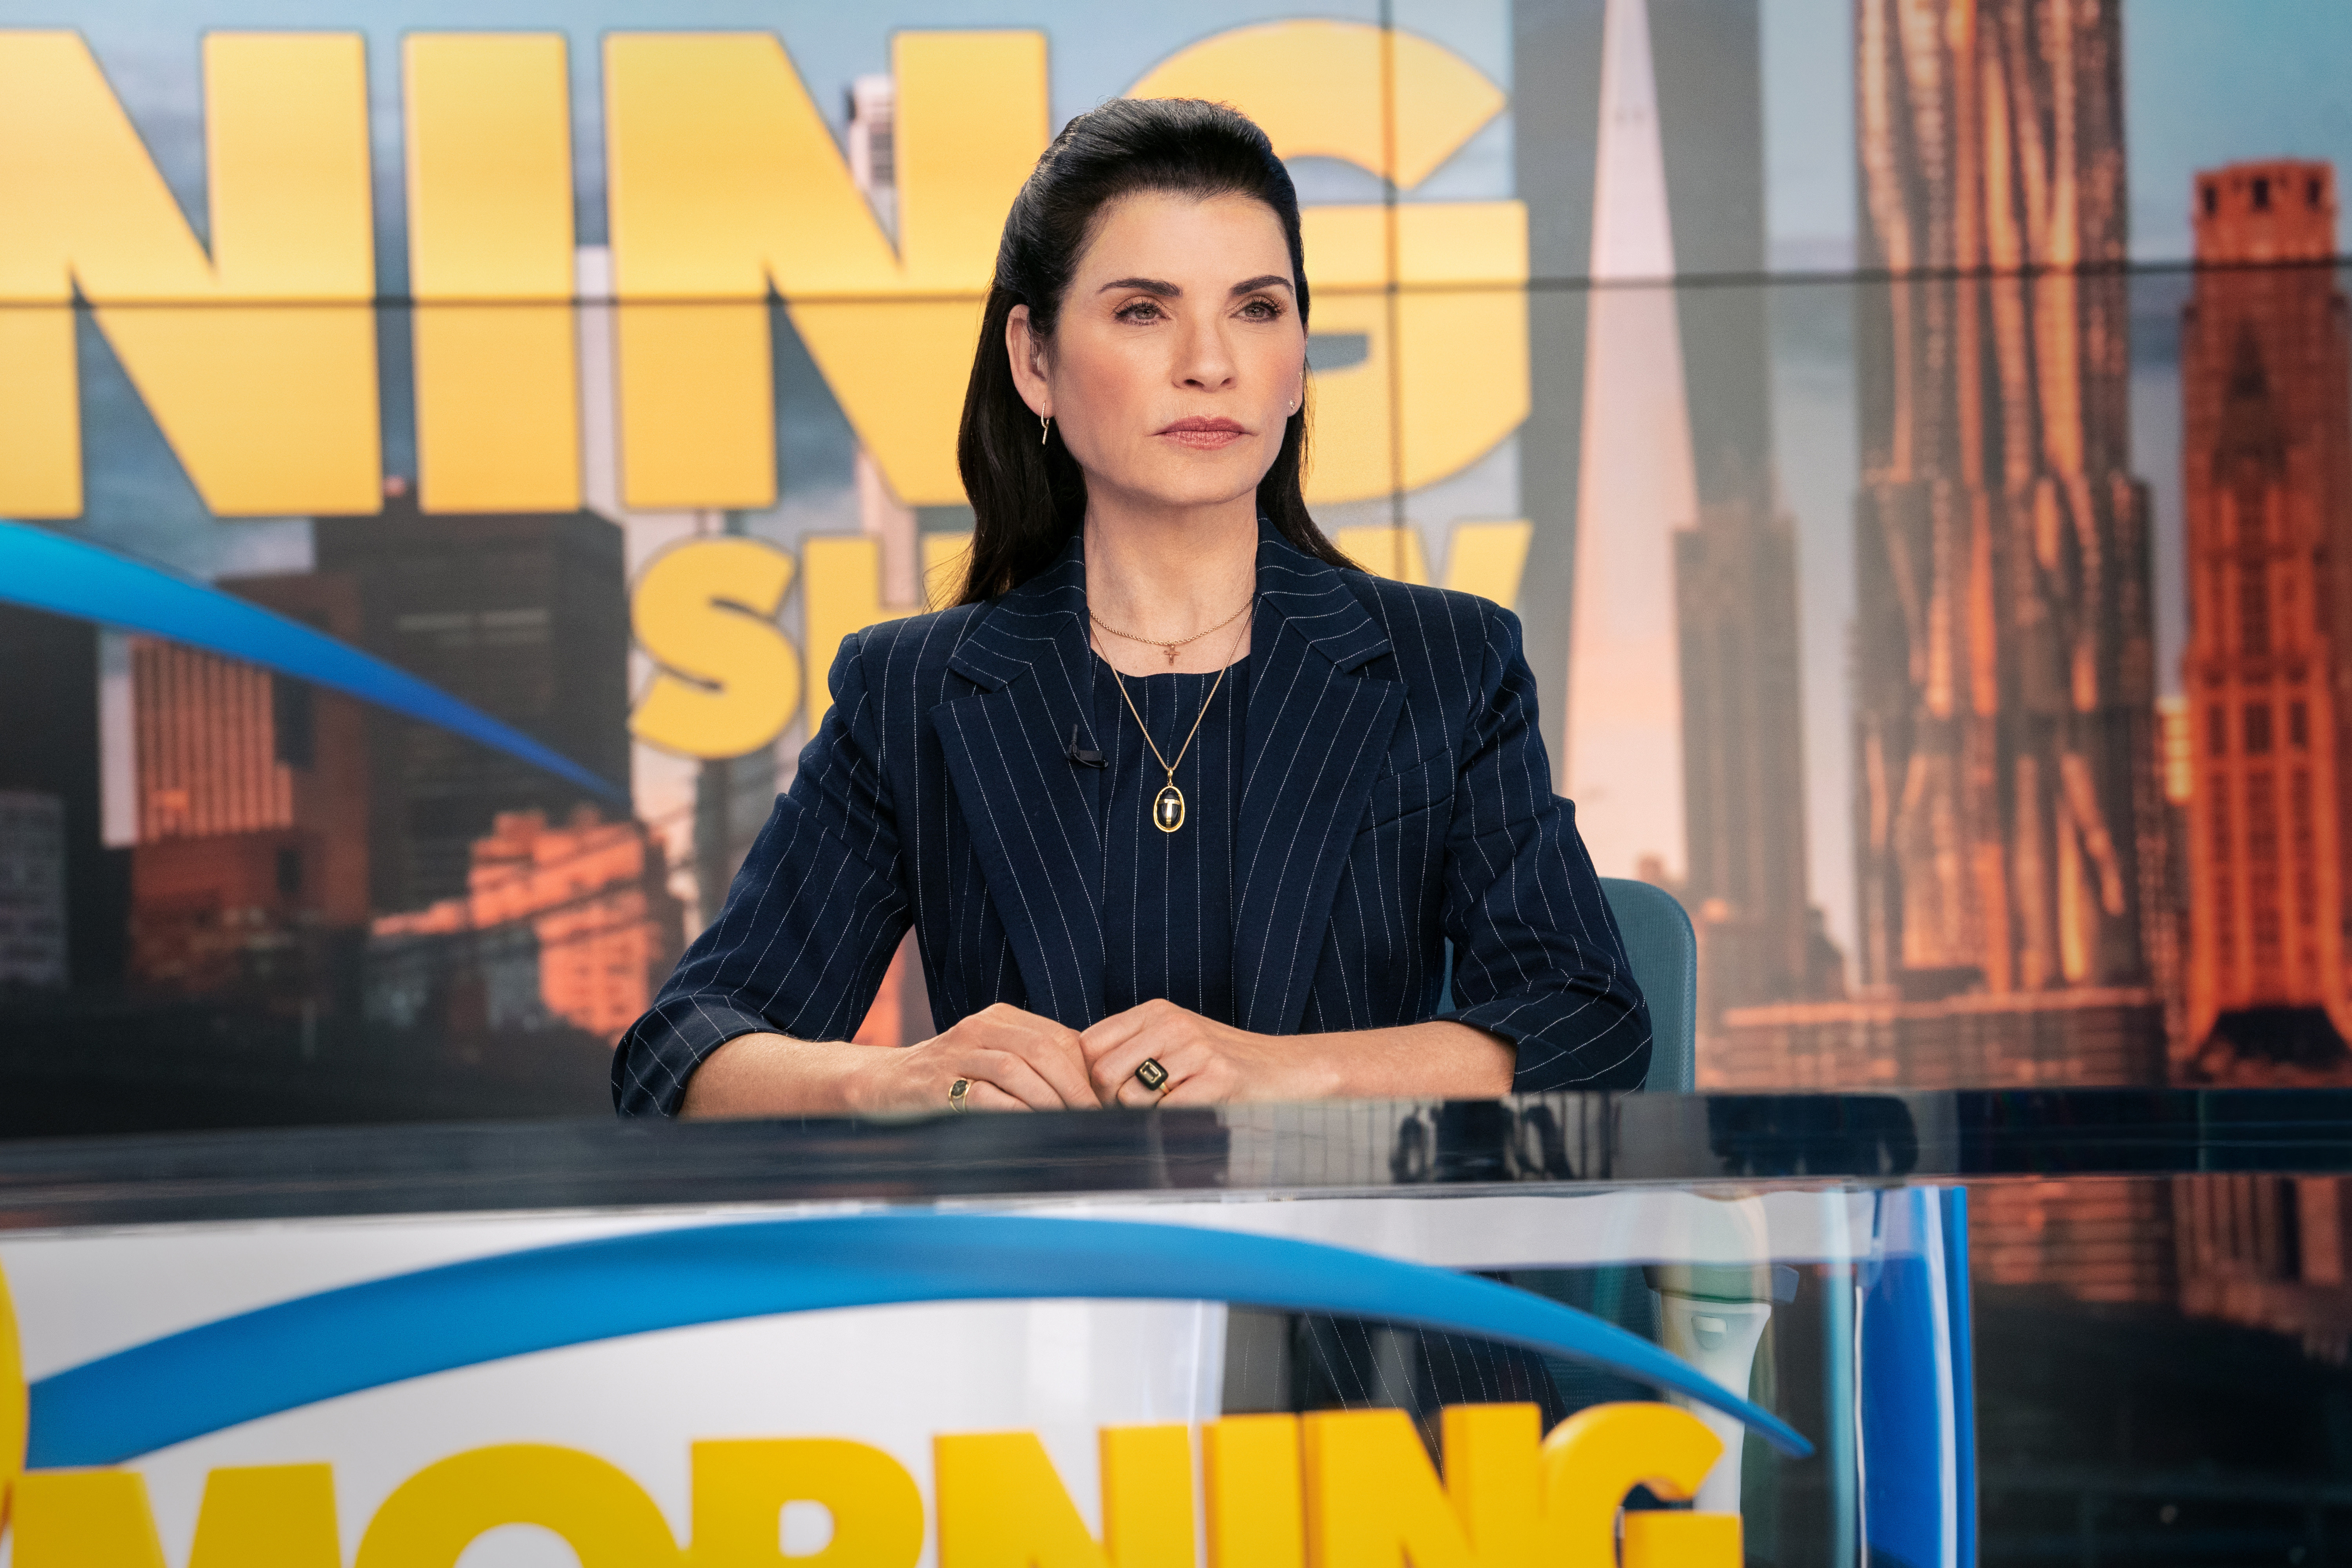 julianna margulies, tv show, the morning show